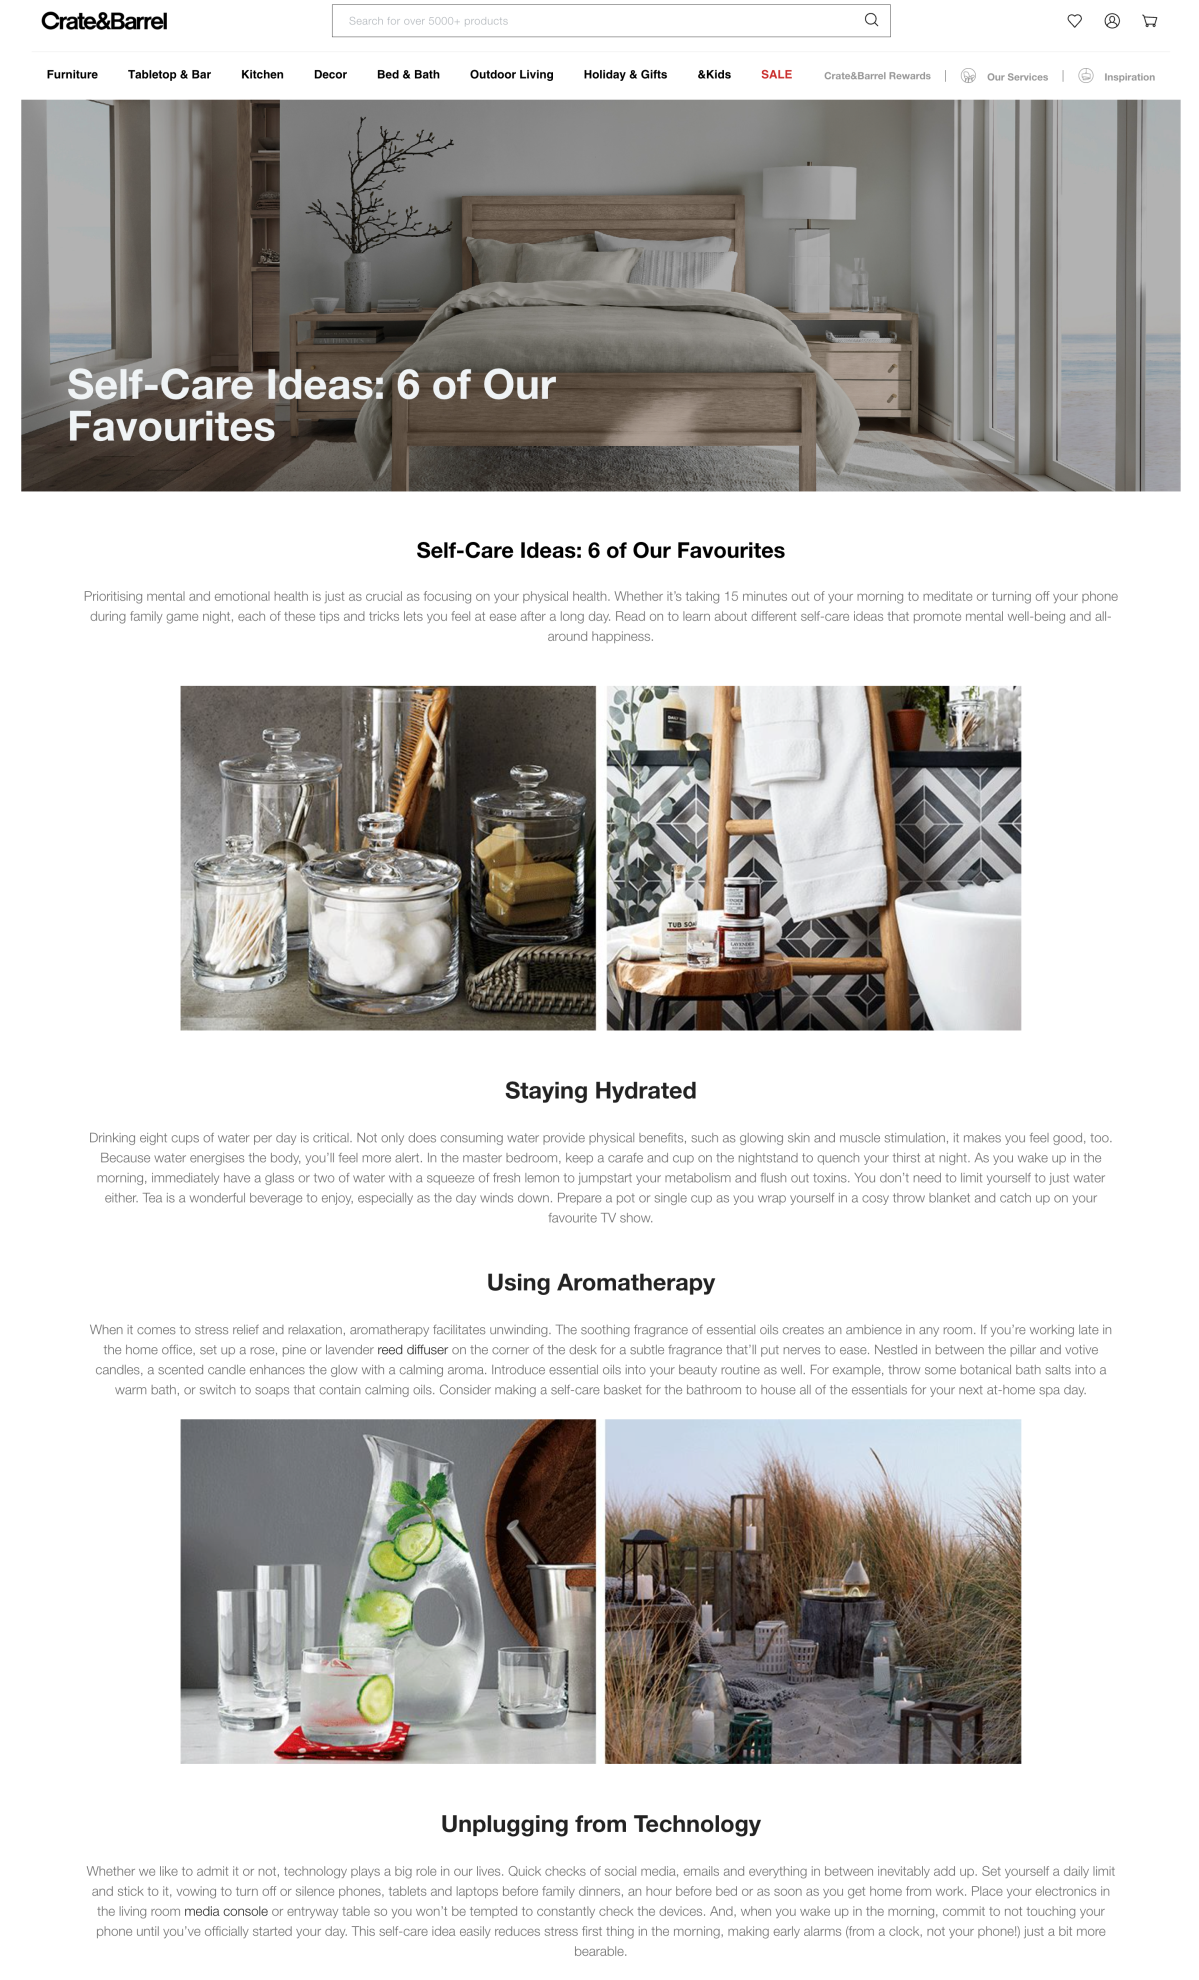 Screenshot of the company Crate & Barrel’s home page depicting its use of rich media